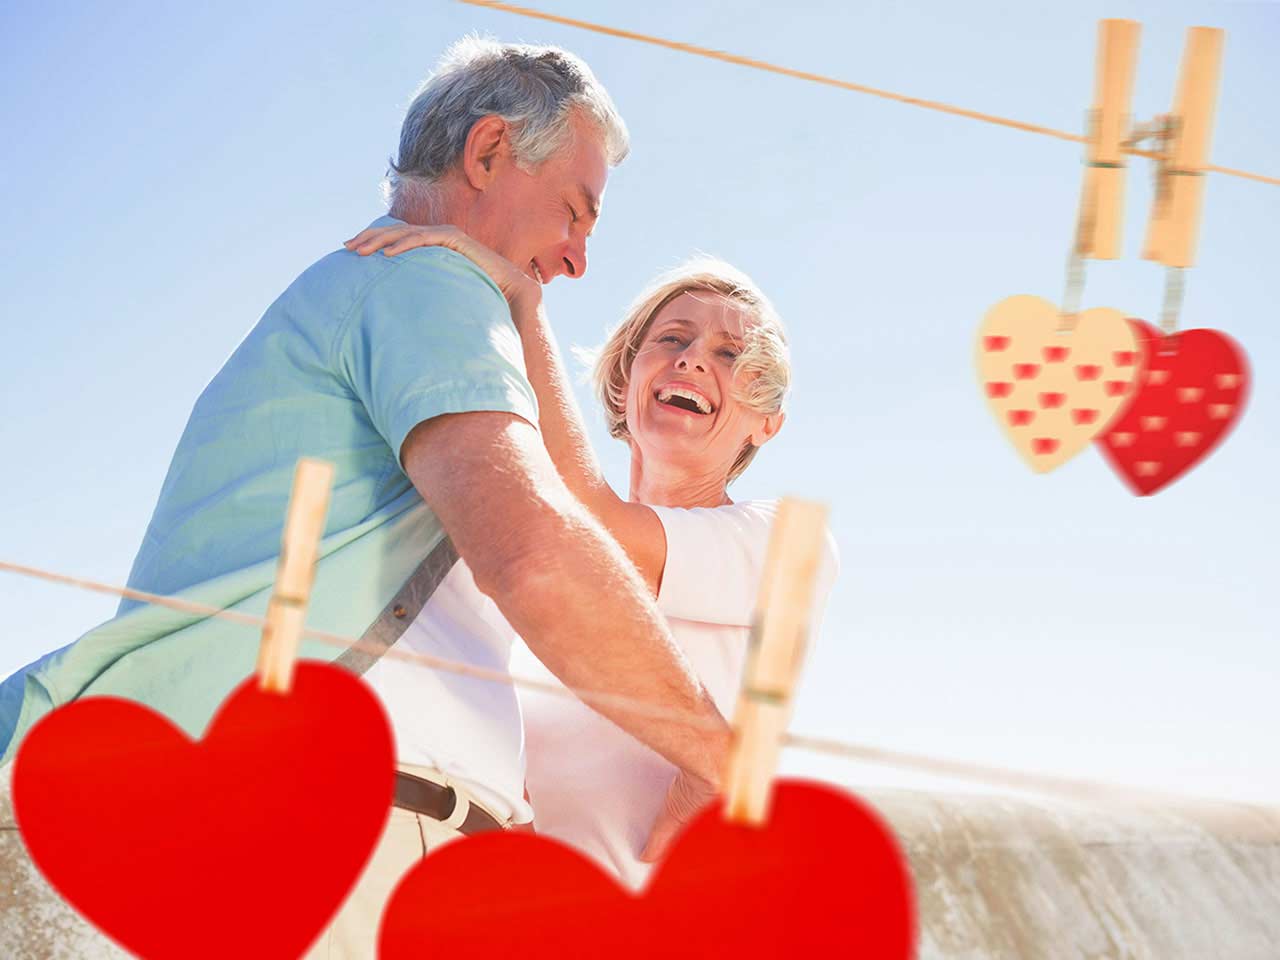 Mature couple laughing with love hearts around them